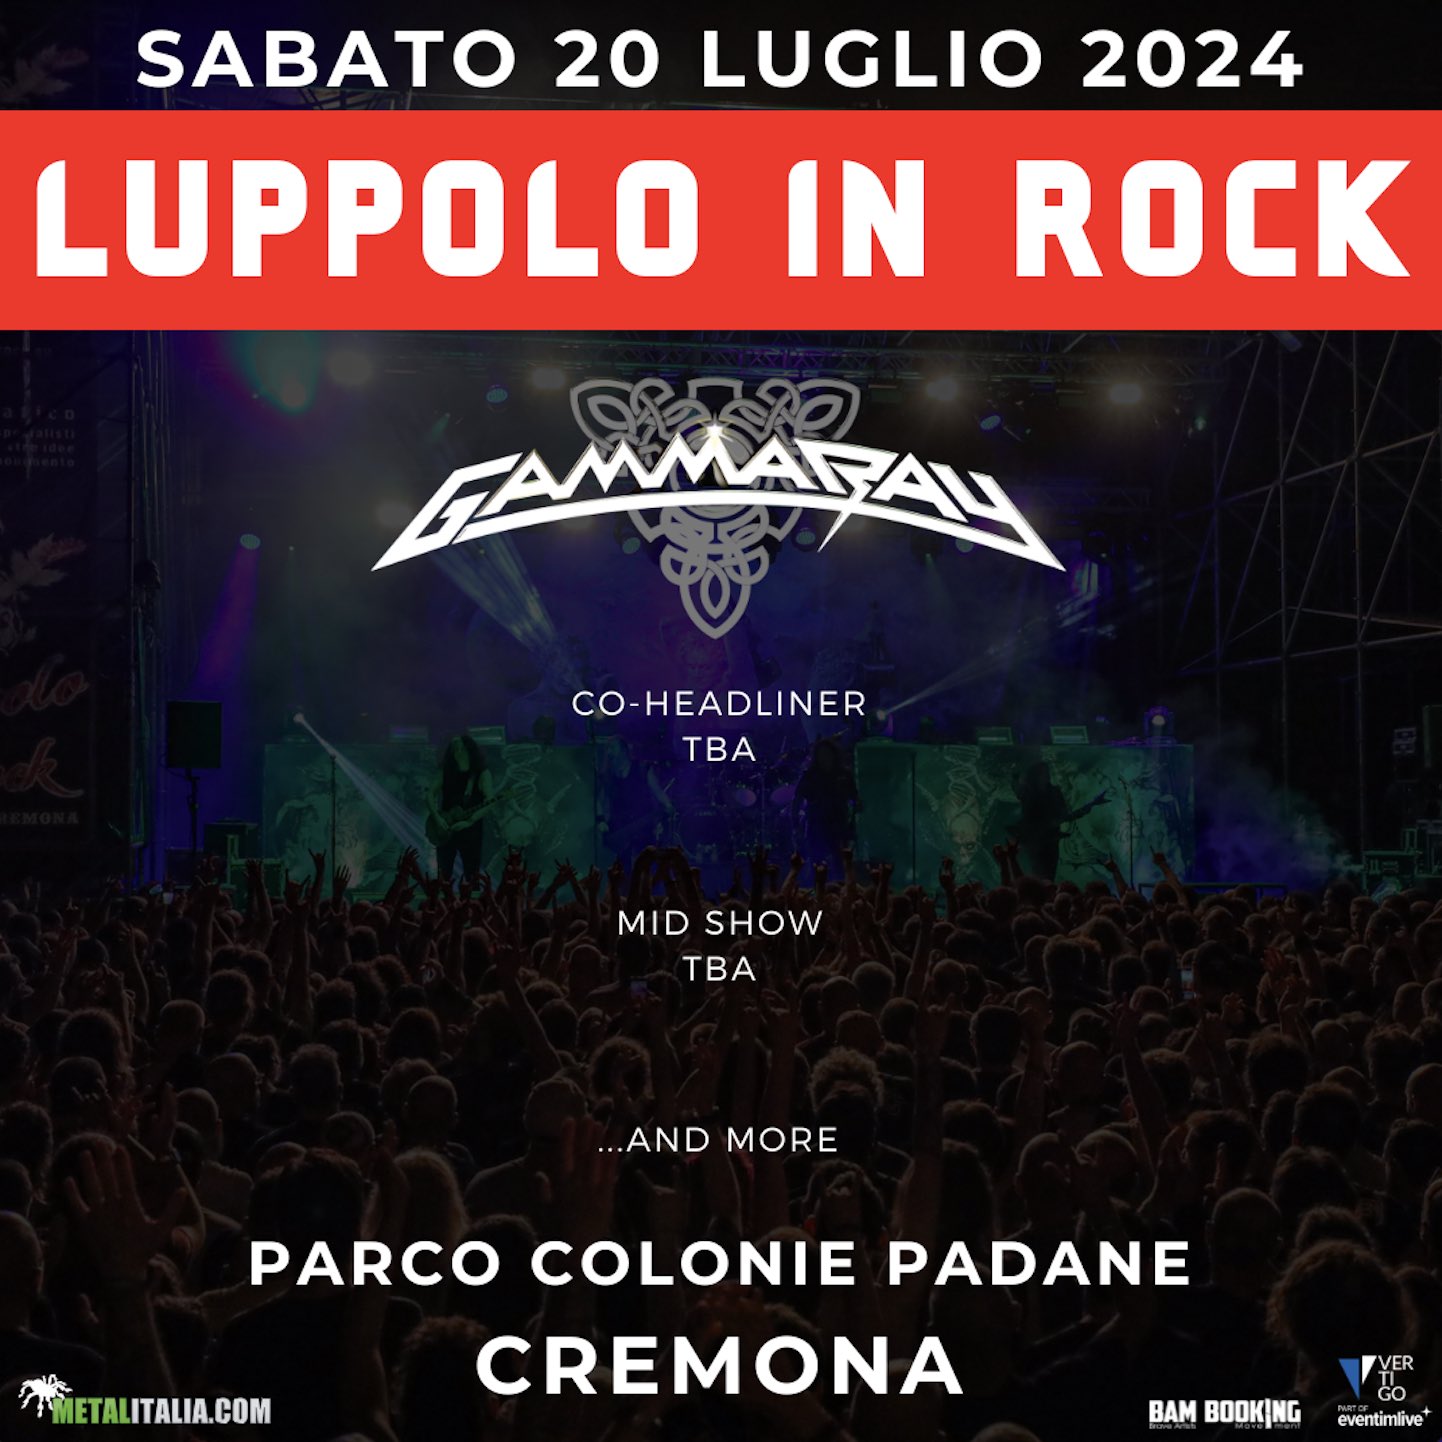 GAMMA RAY: a Luppolo In Rock 2024 con ospite Ralf Scheepers